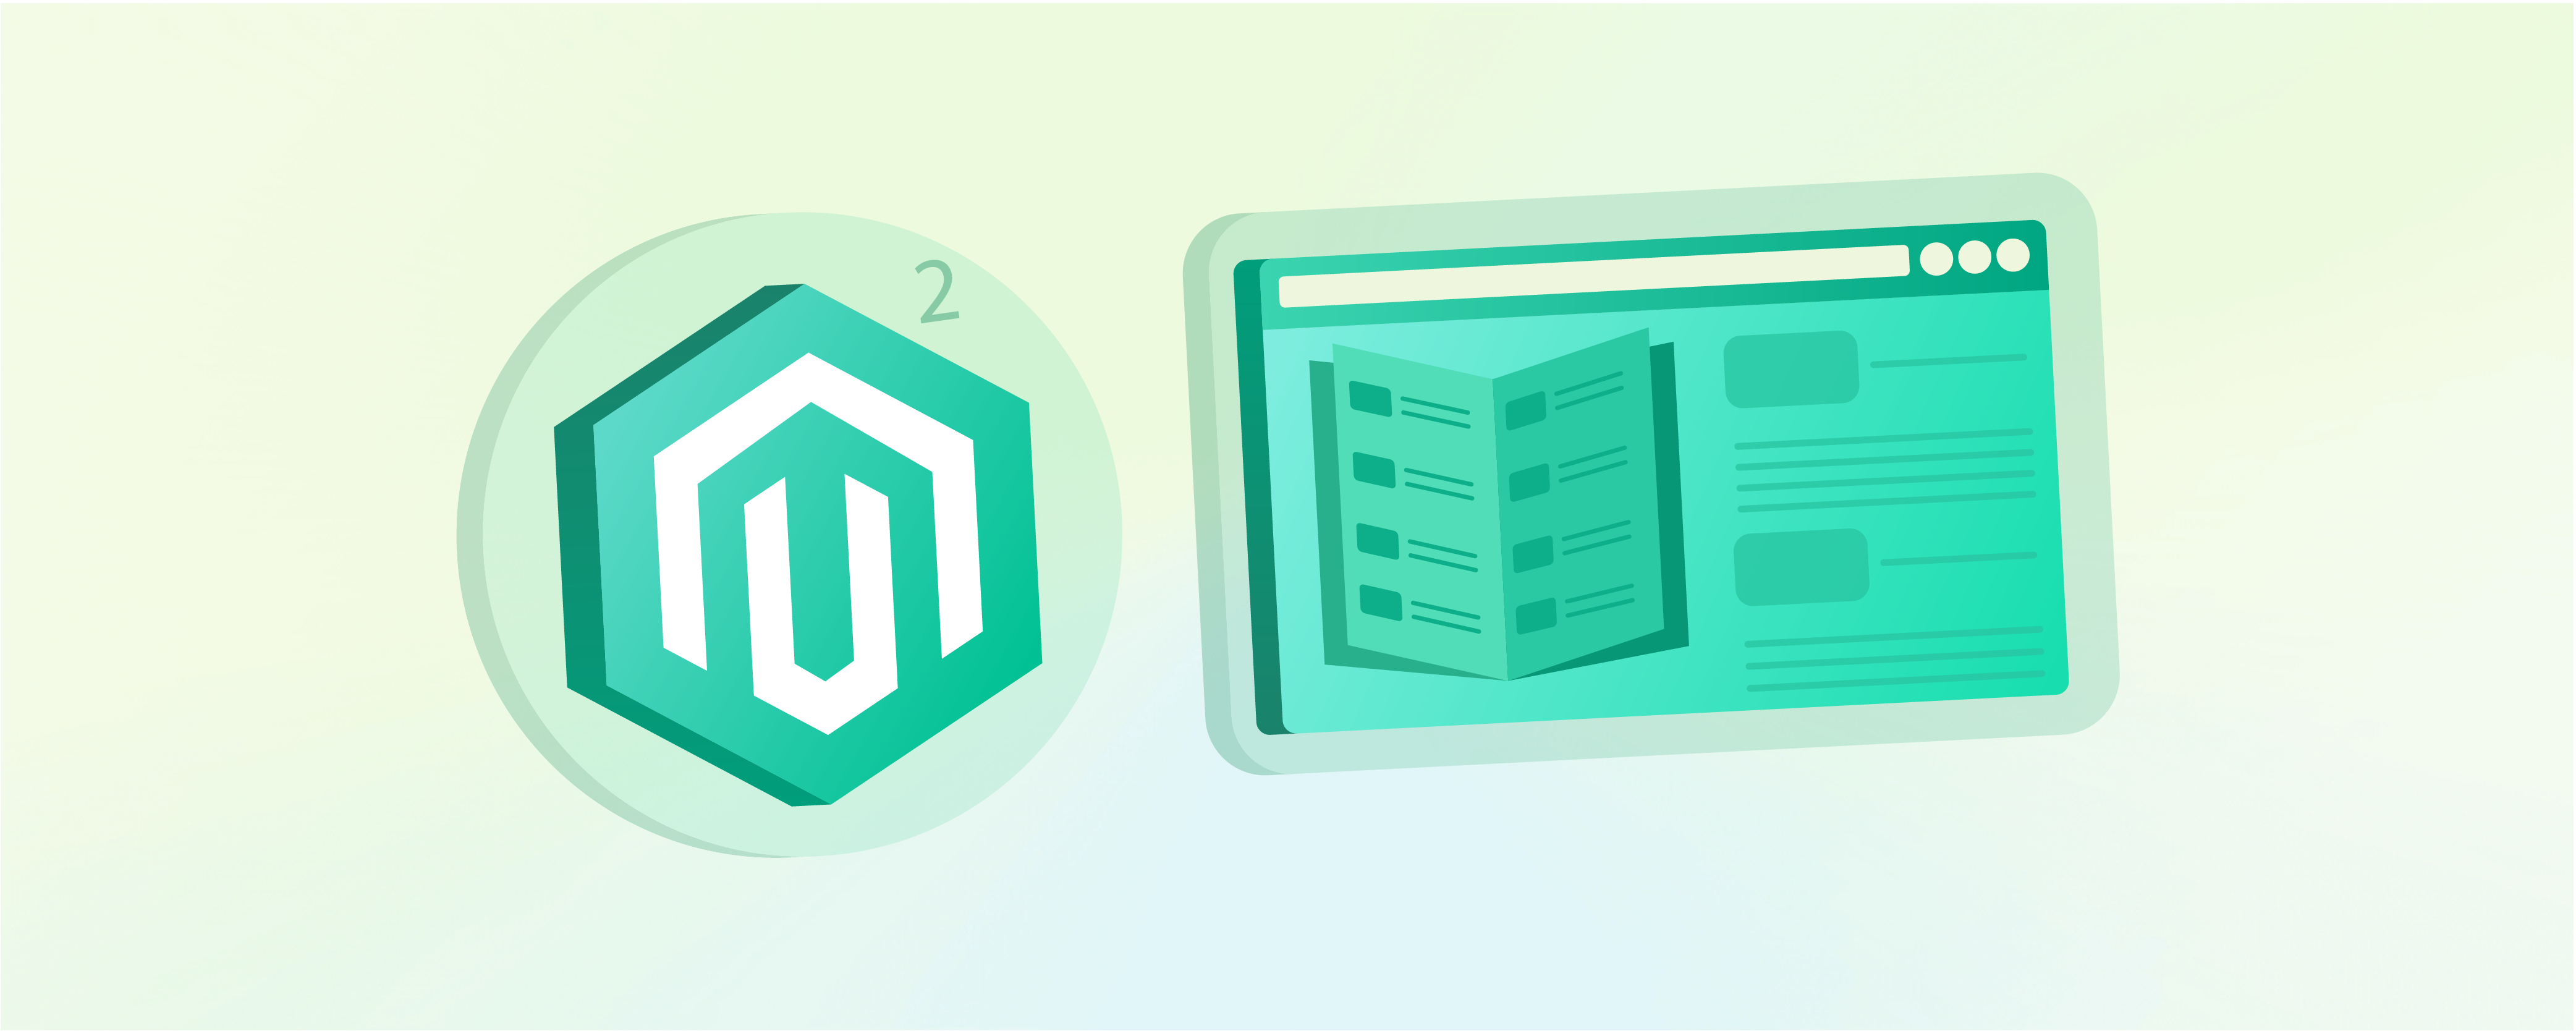 Why Choose the Magento 2 Flat Catalog Over the EAV Structure?